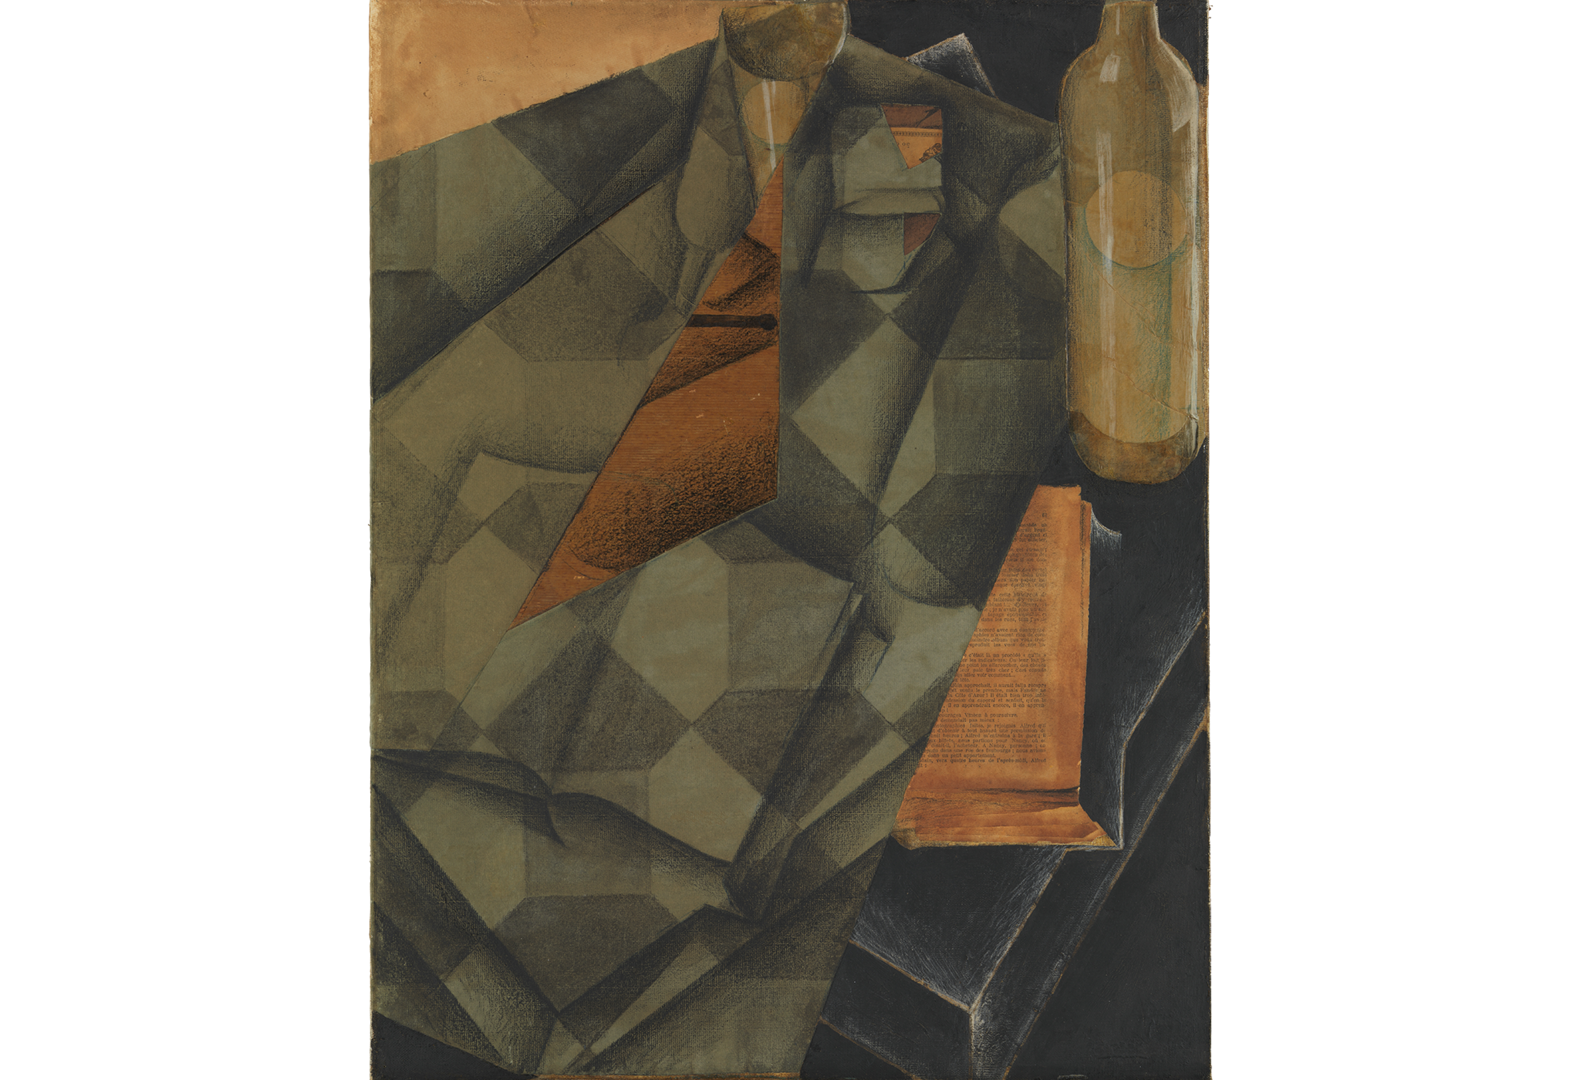 Painting with navy blue, green, and brown tones of a bottle, glass, pack of Scaferlati Ordinaire tobacco, and book on a tabletop